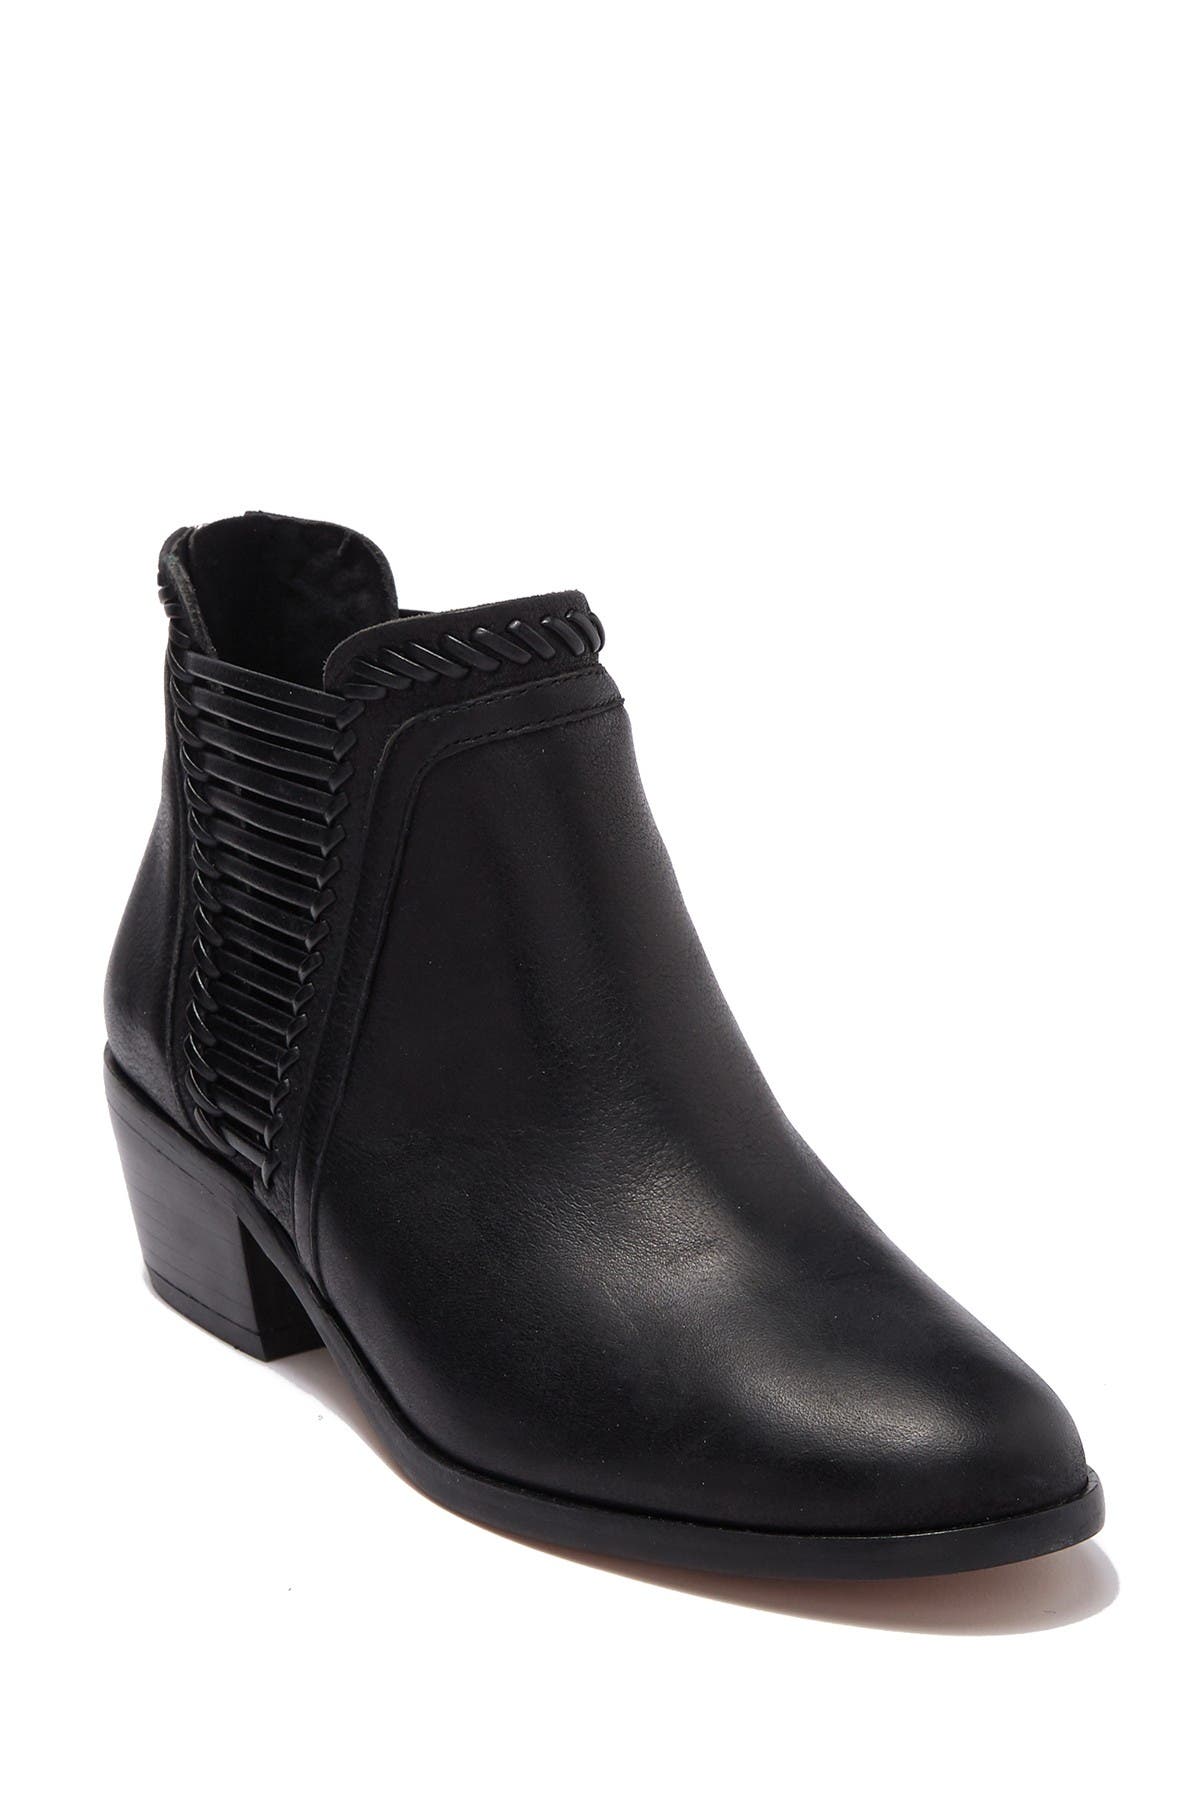 Vince Camuto | Pippsy Bootie 